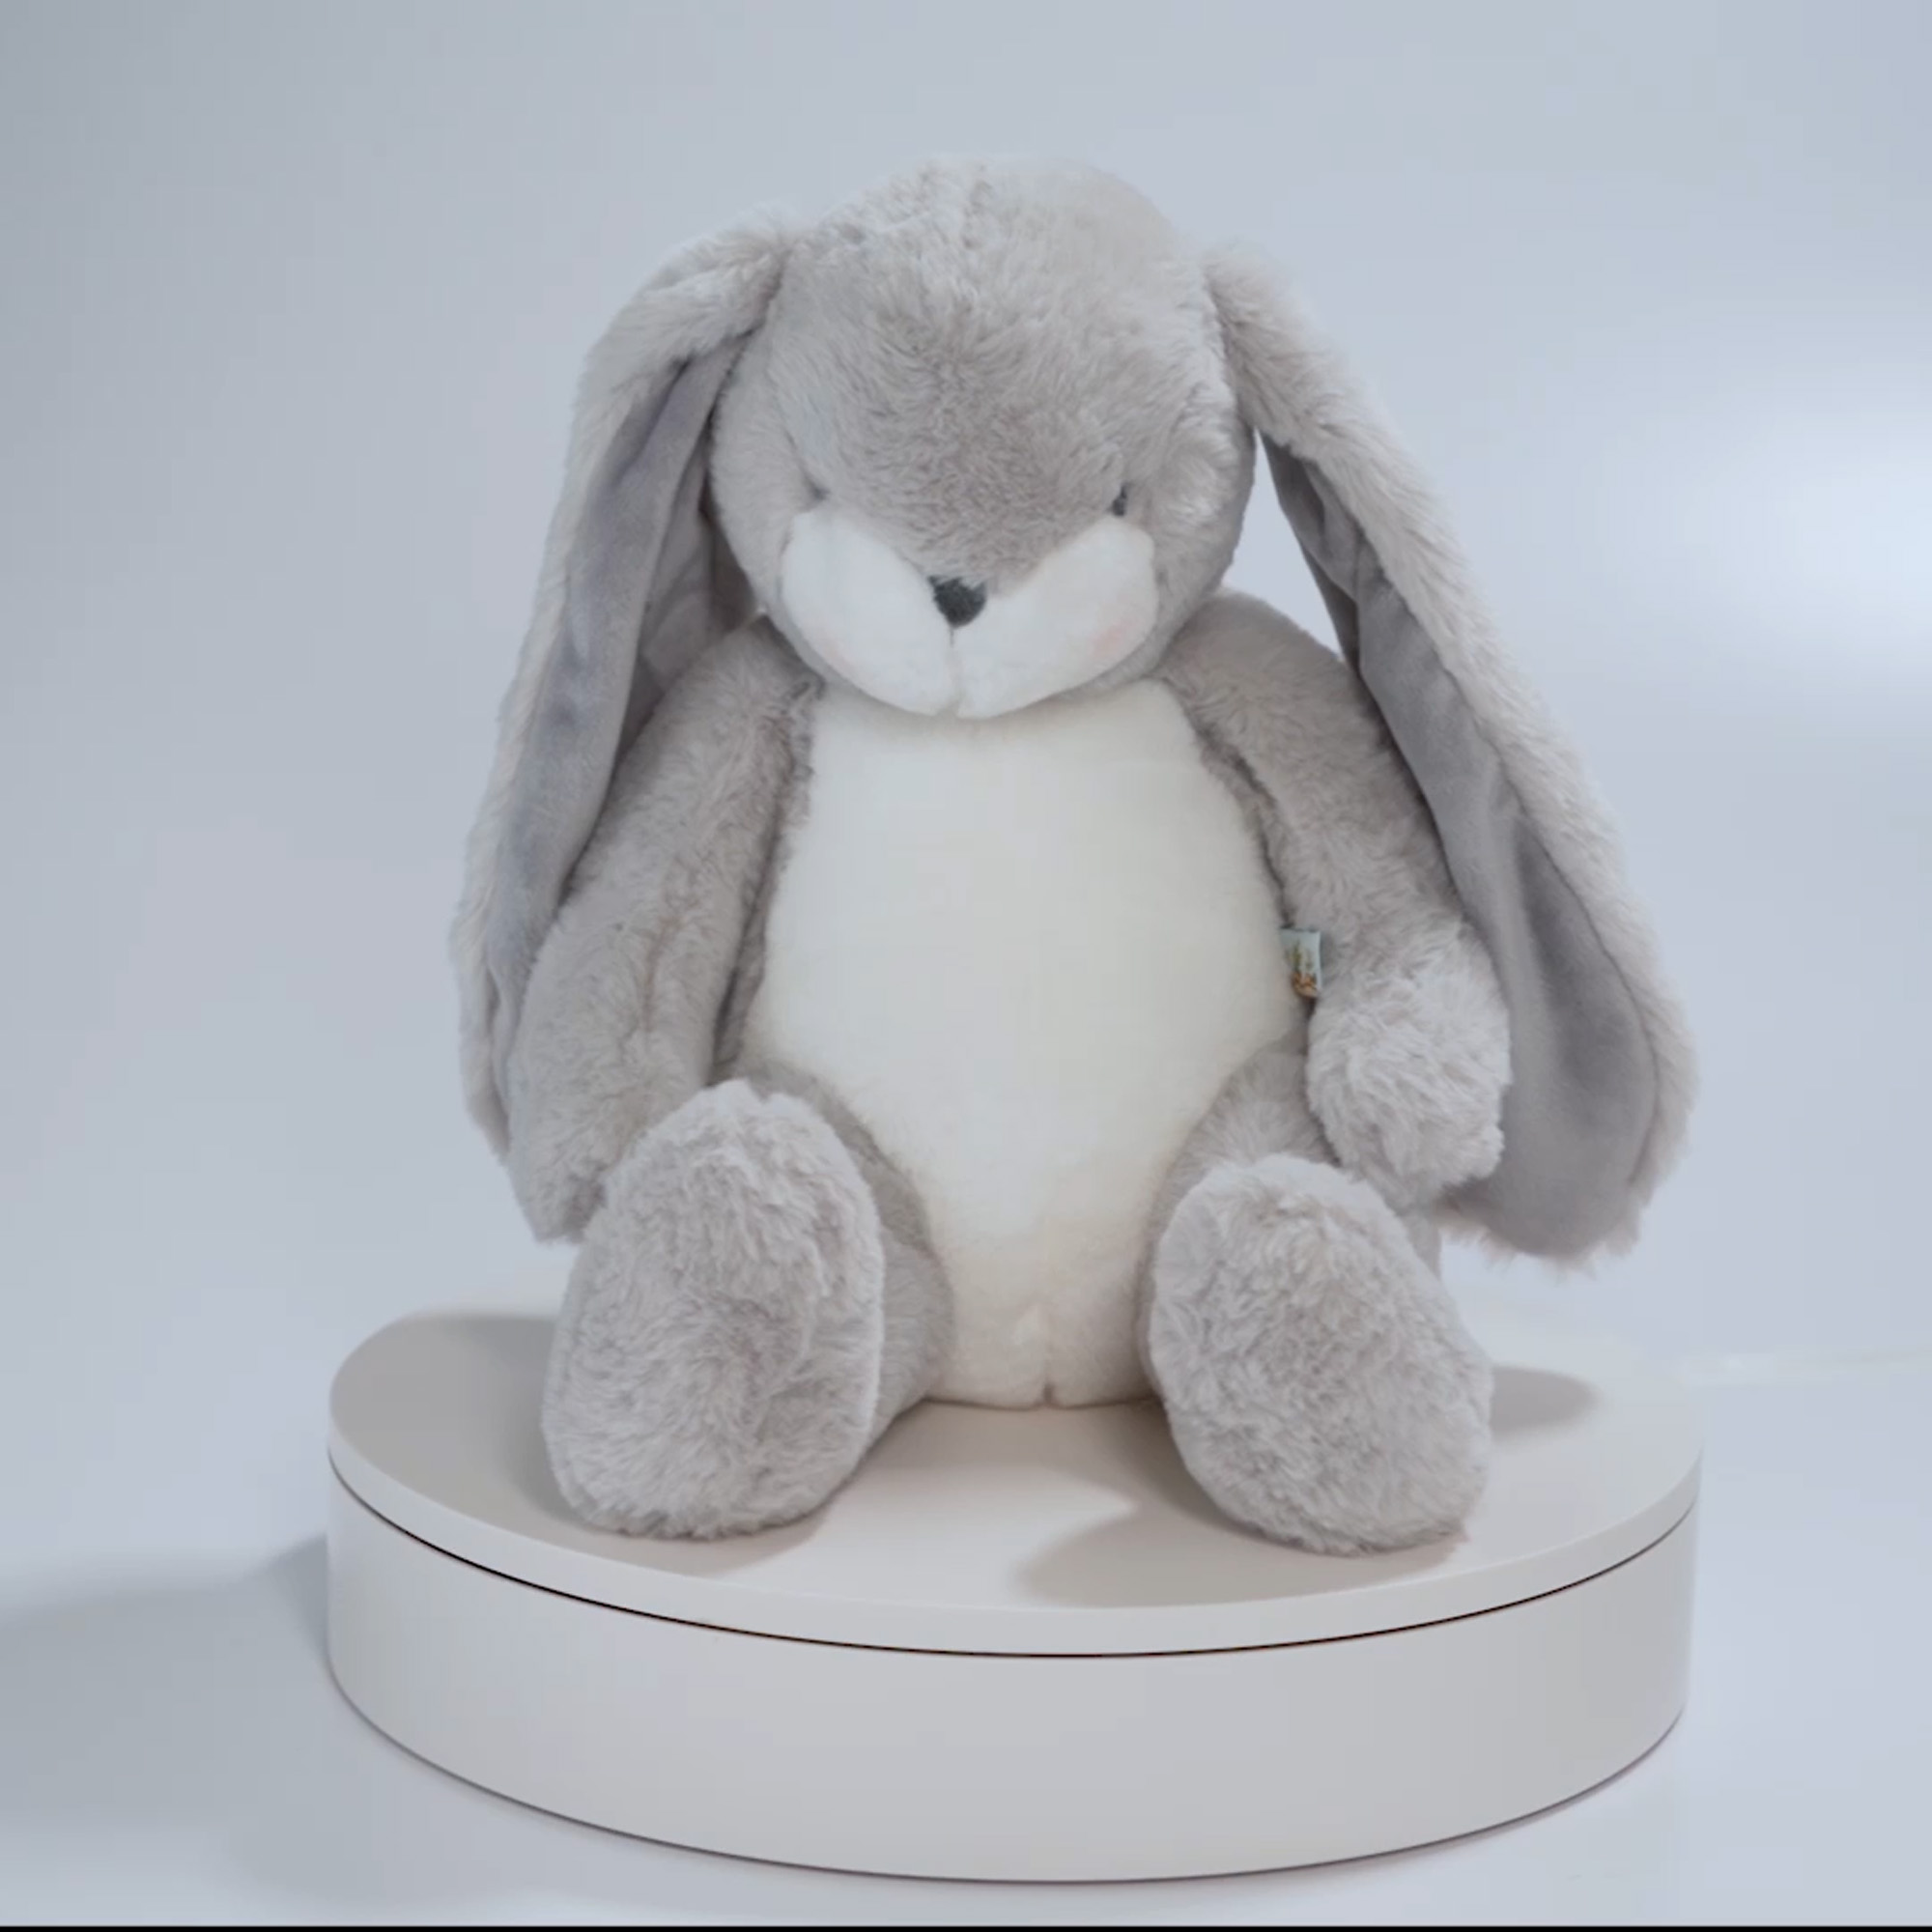 Peluche sweet nibble gray bunny 40 cm - Bunnies By The Bay